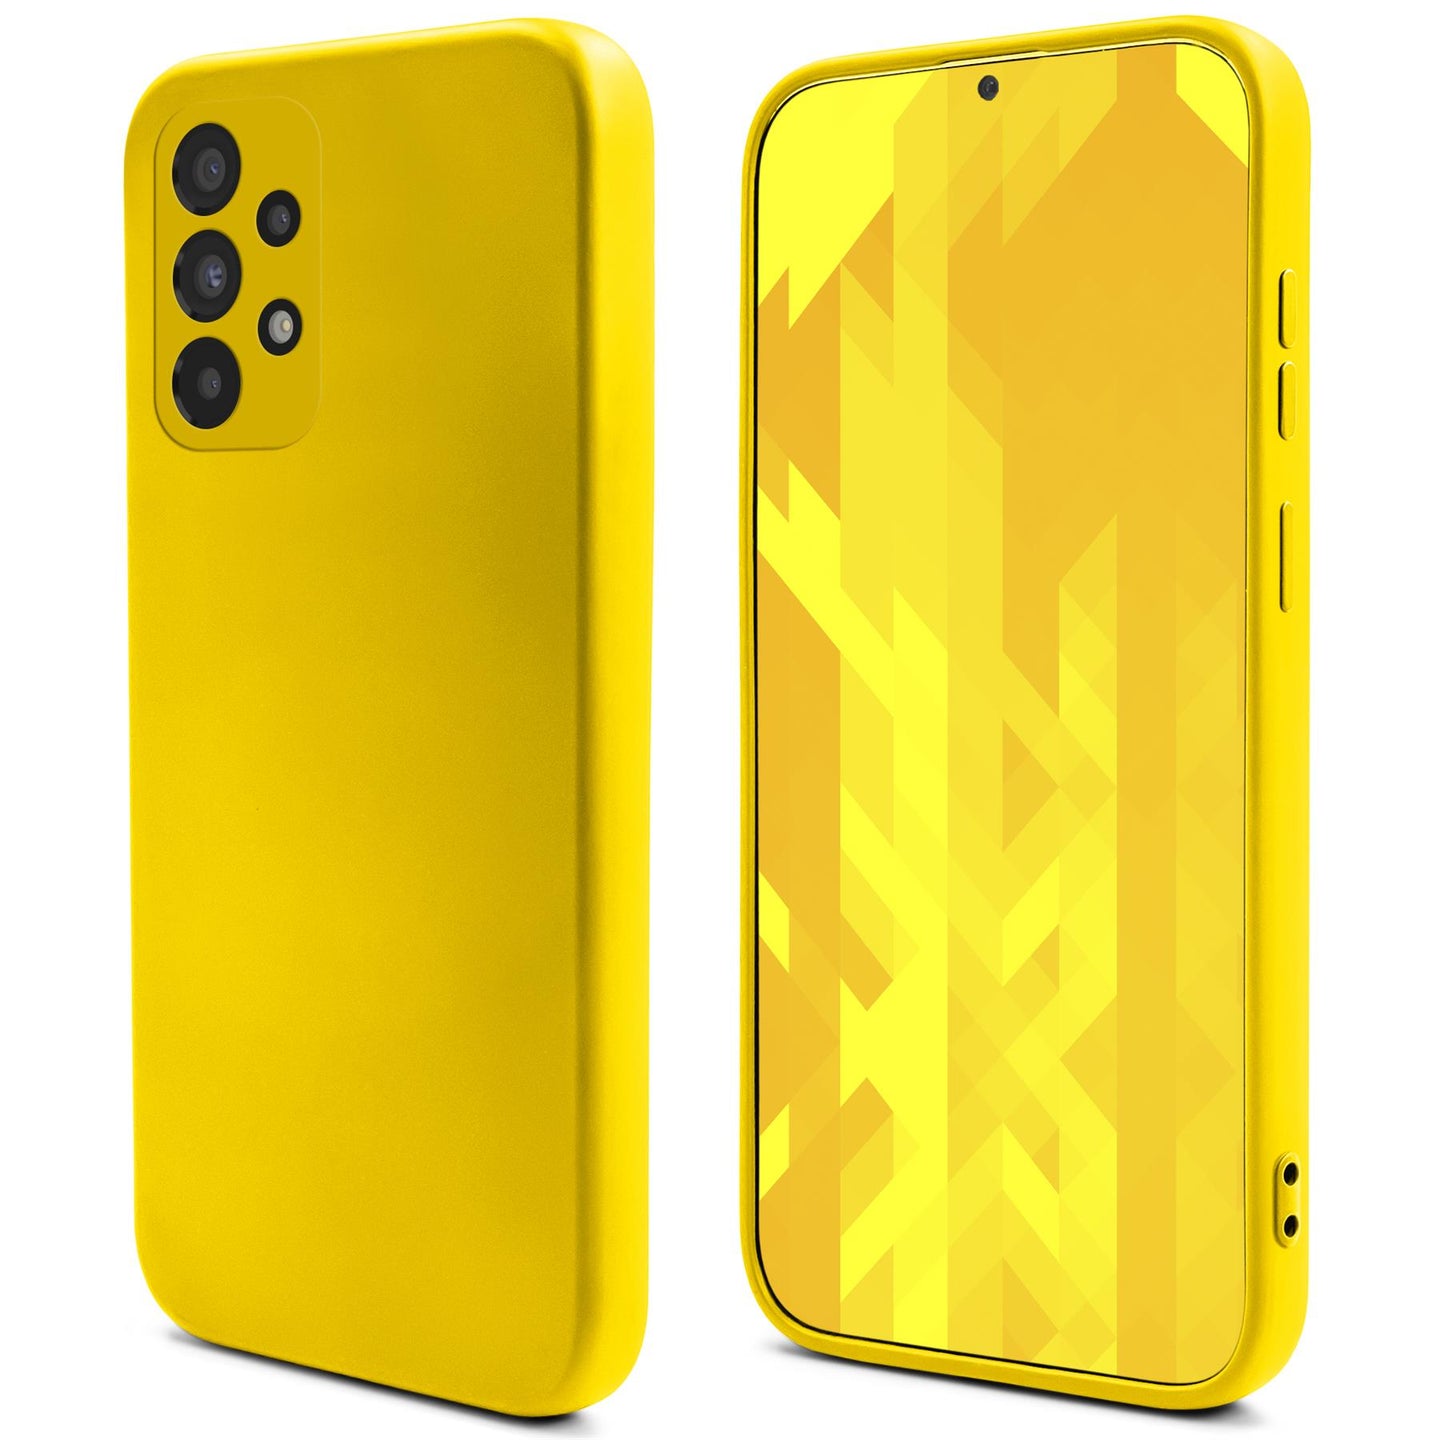 Moozy Lifestyle. Designed for Samsung A52, Samsung A52 5G Case, Yellow - Liquid Silicone Lightweight Cover with Matte Finish and Soft Microfiber Lining, Premium Silicone Case